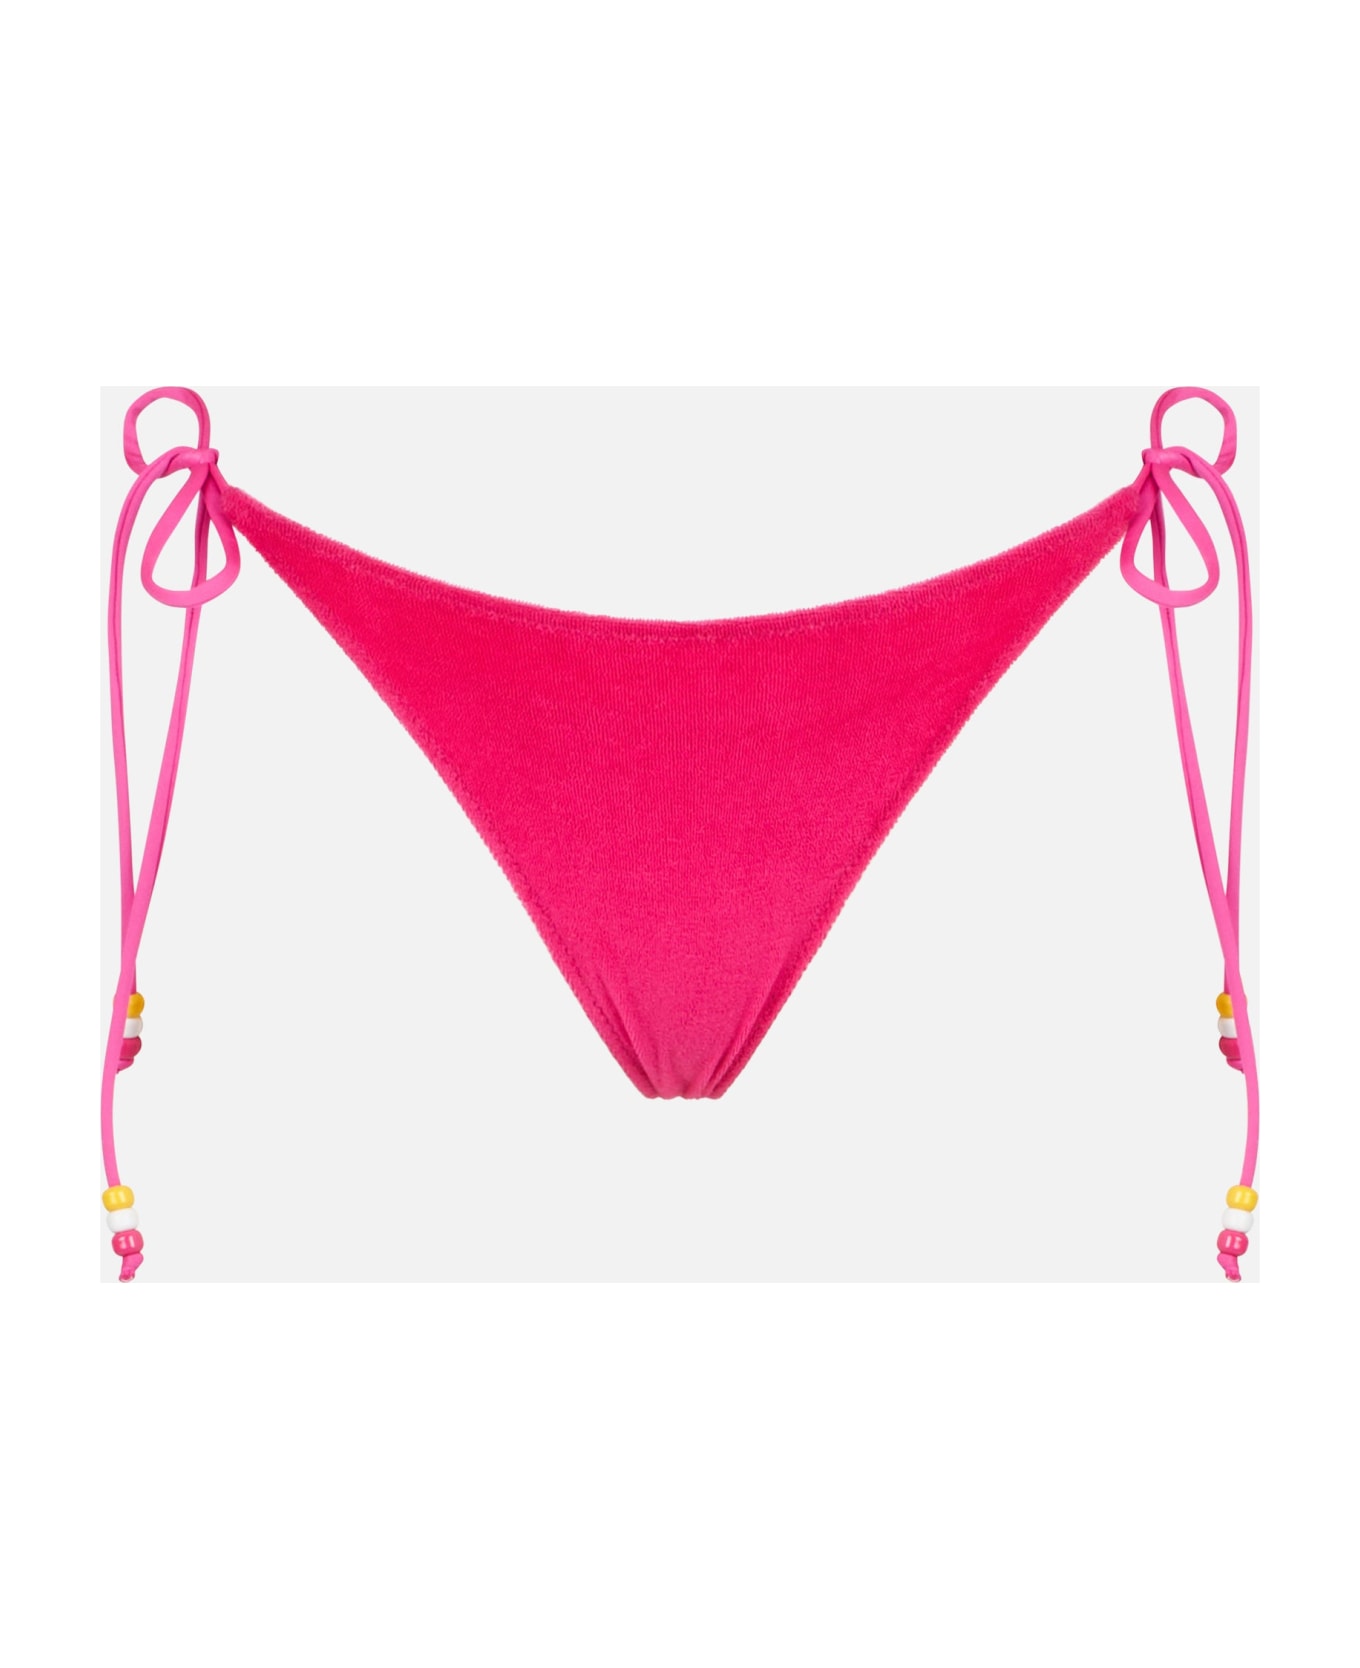 MC2 Saint Barth Woman Fuchsia Terry Swim Briefs With Side Laces - PINK ボトムス